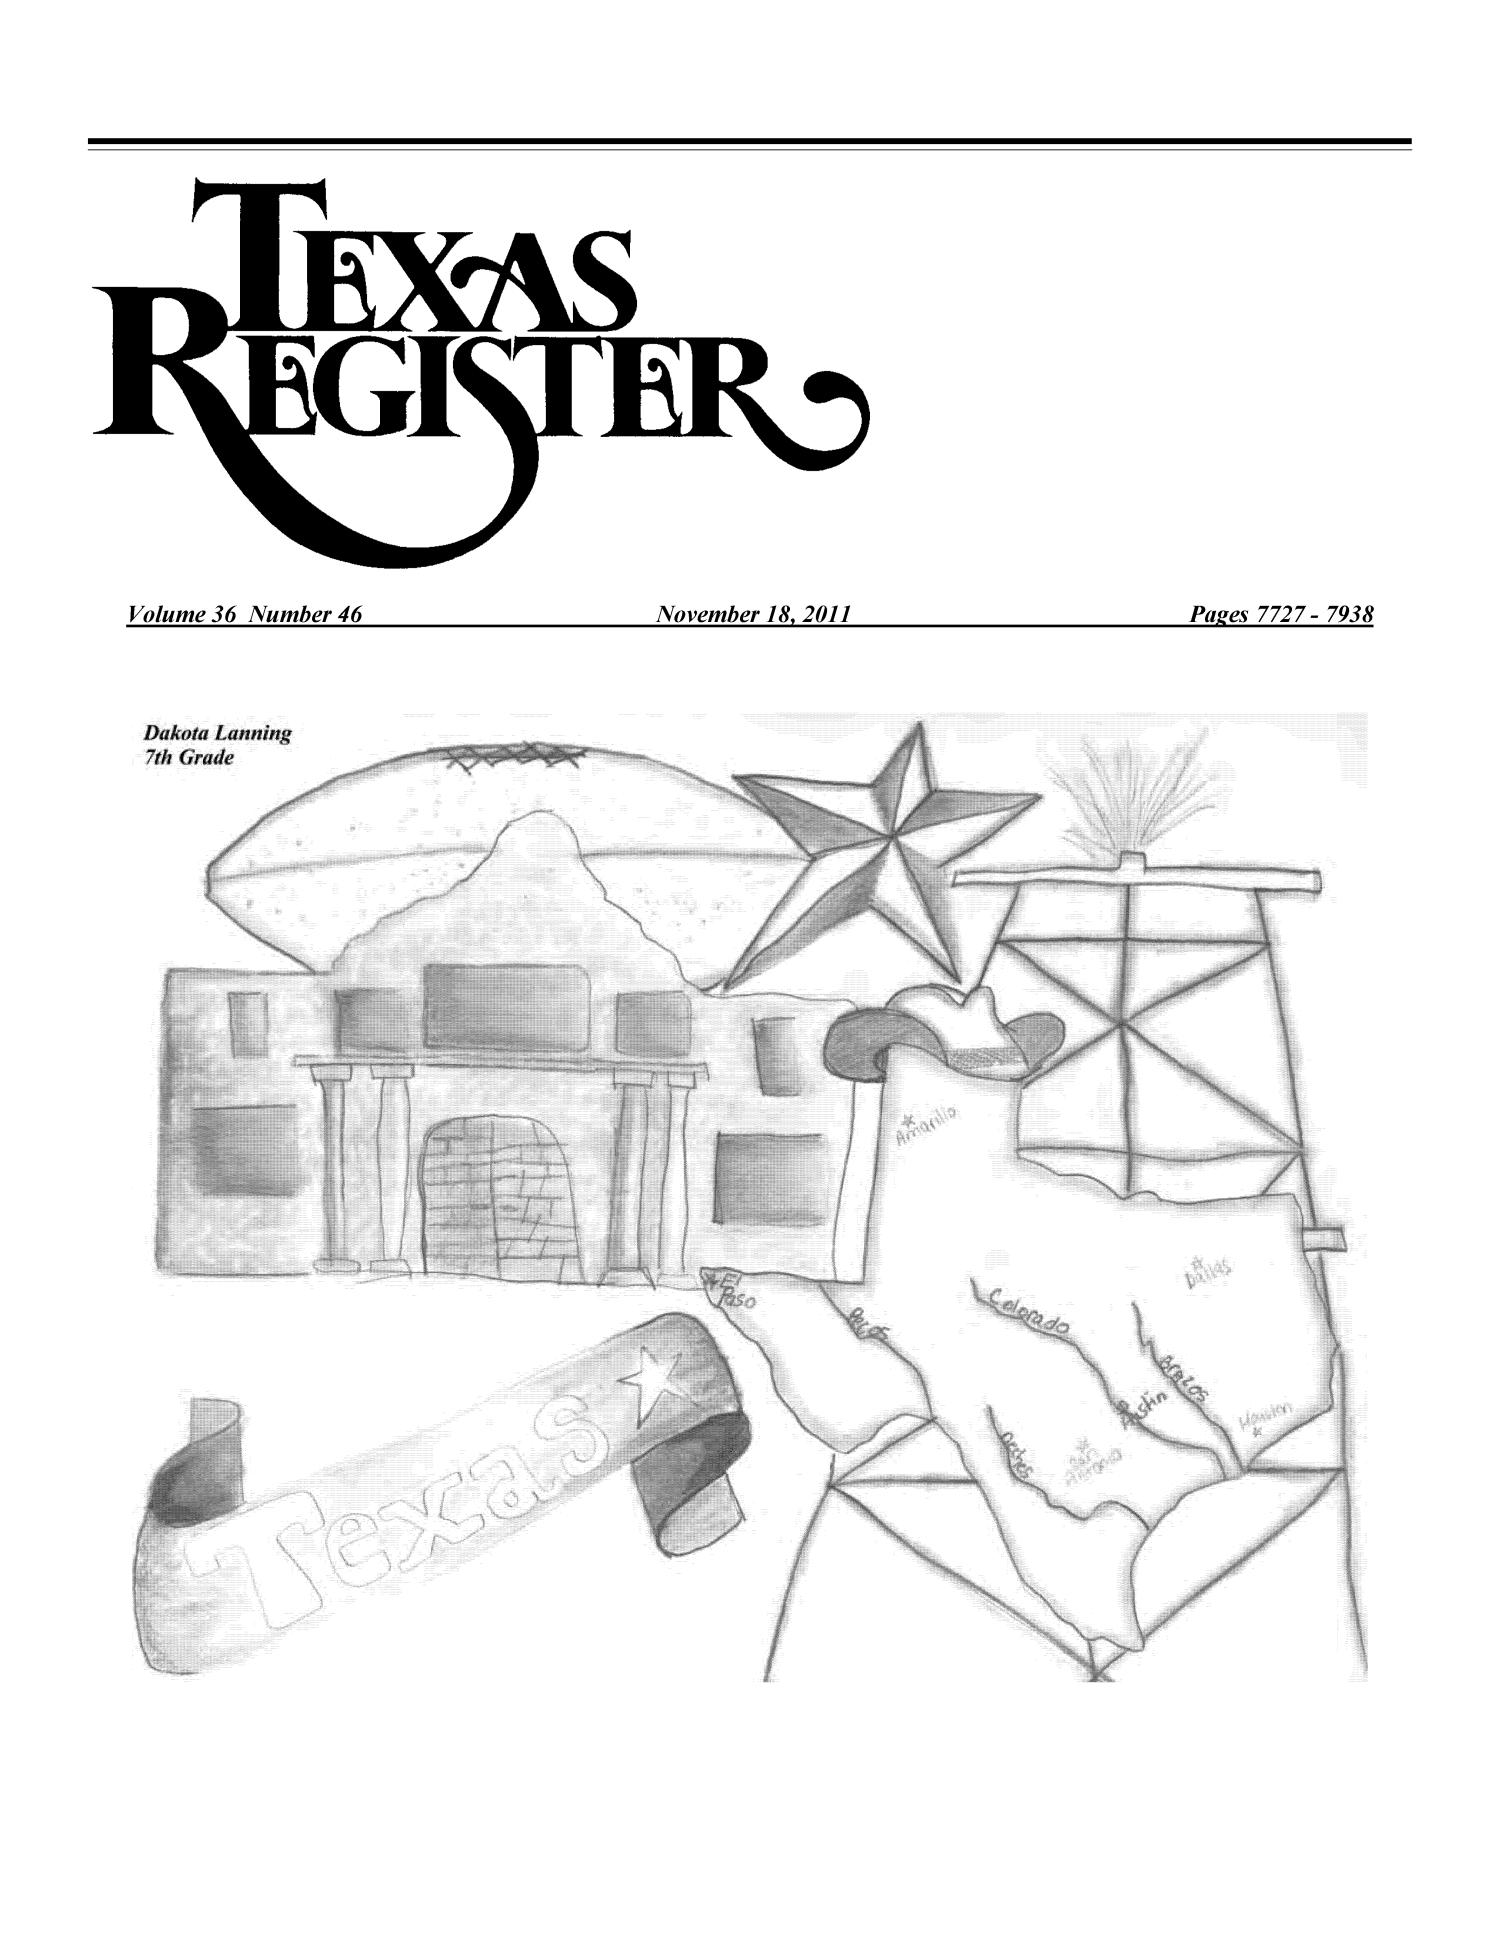 Texas Register, Volume 36, Number 46, Pages 7727-7938, November 18, 2011
                                                
                                                    Title Page
                                                